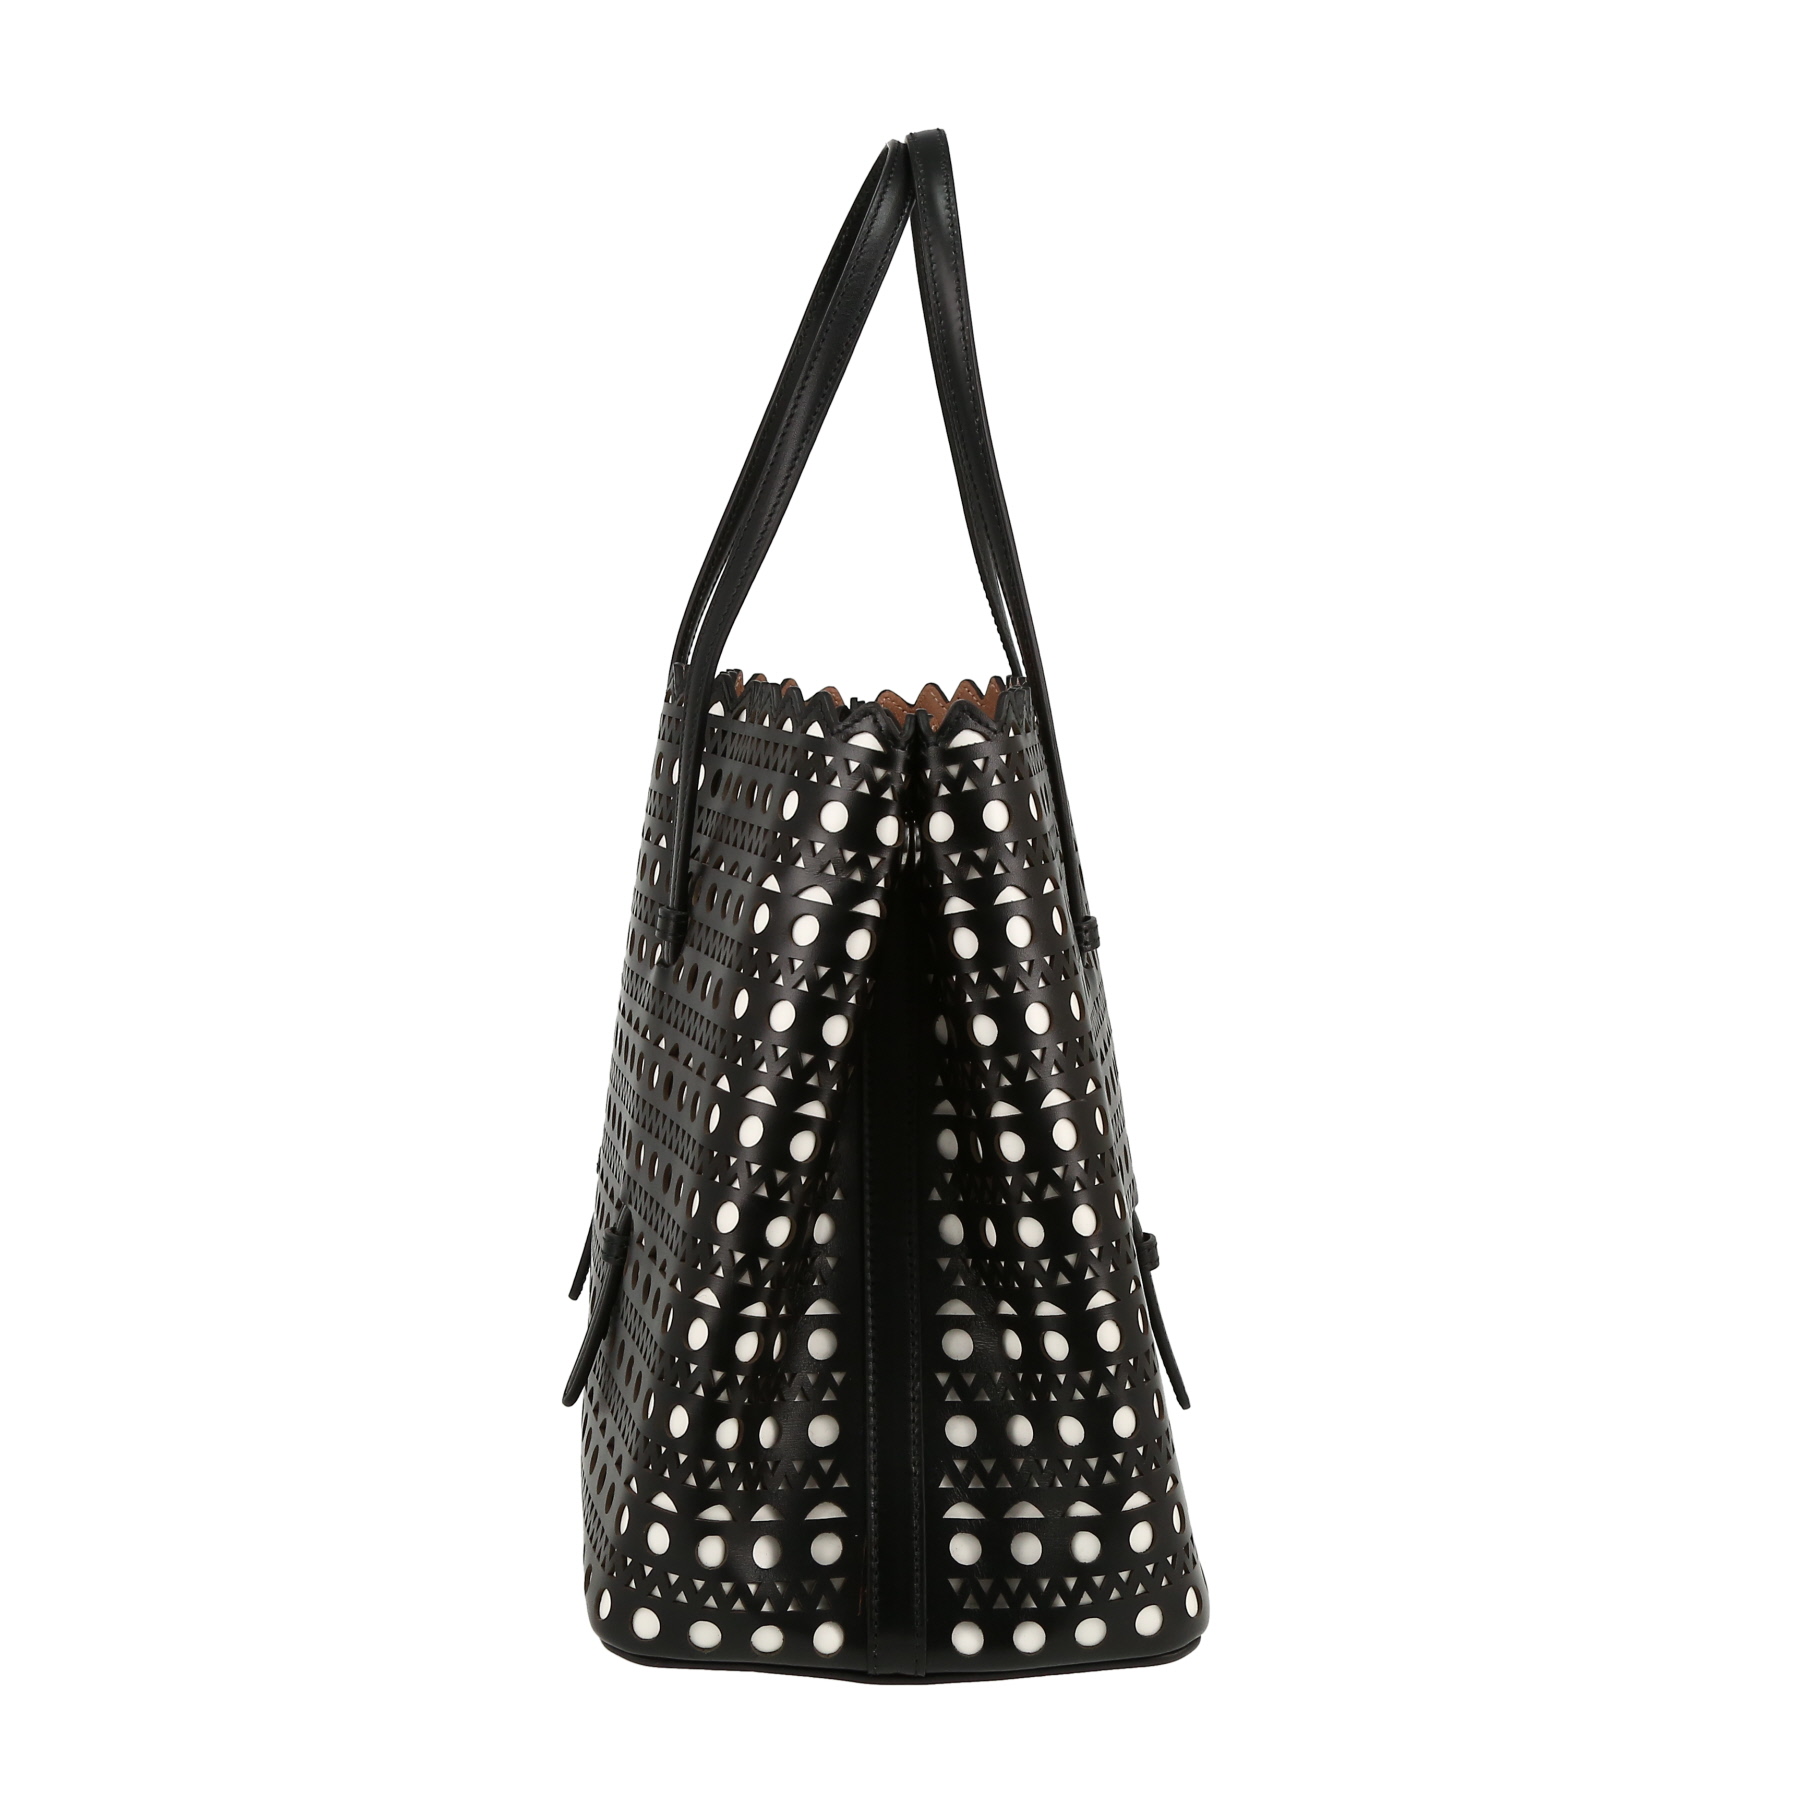 Vienne Shopping Bag In Black Leather